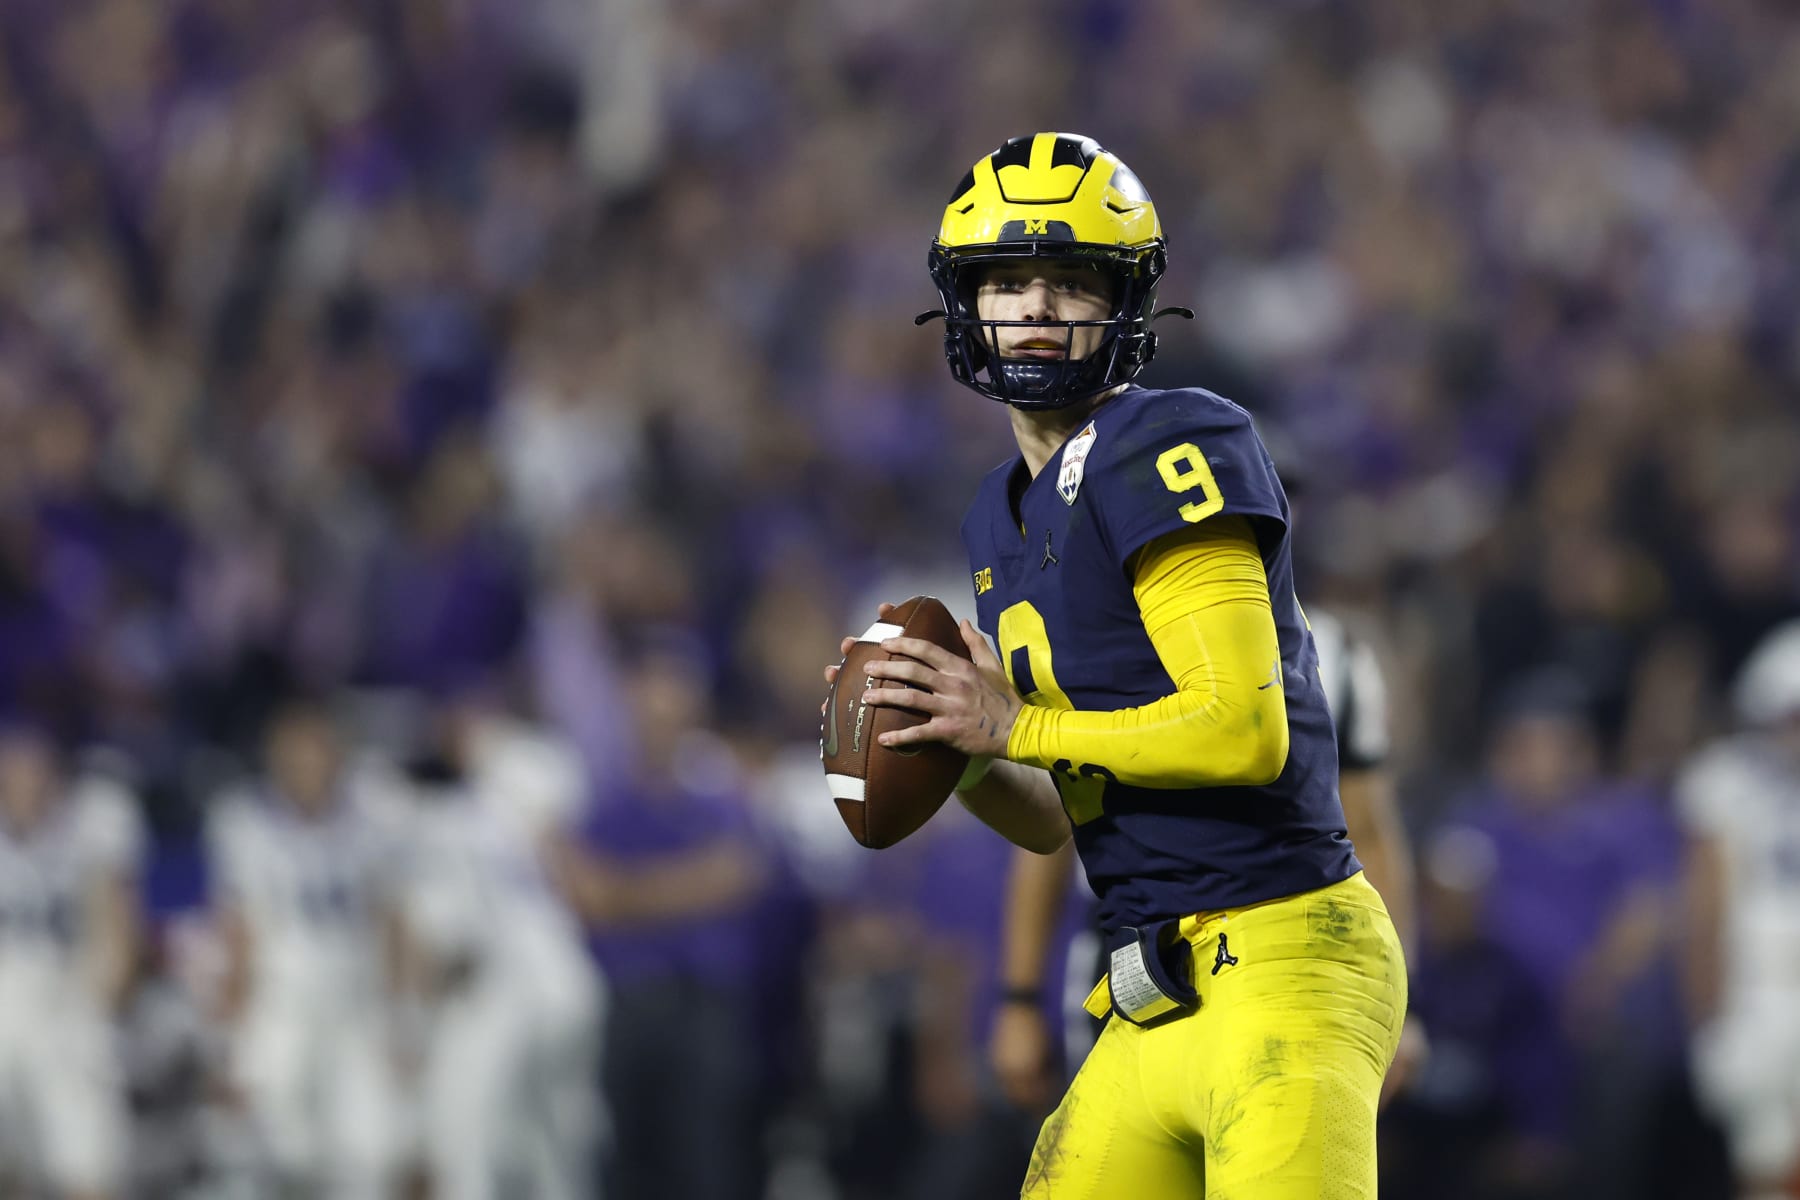 Looking ahead to 2024 NFL Draft: Way-too-early top 10 - Rivals.com